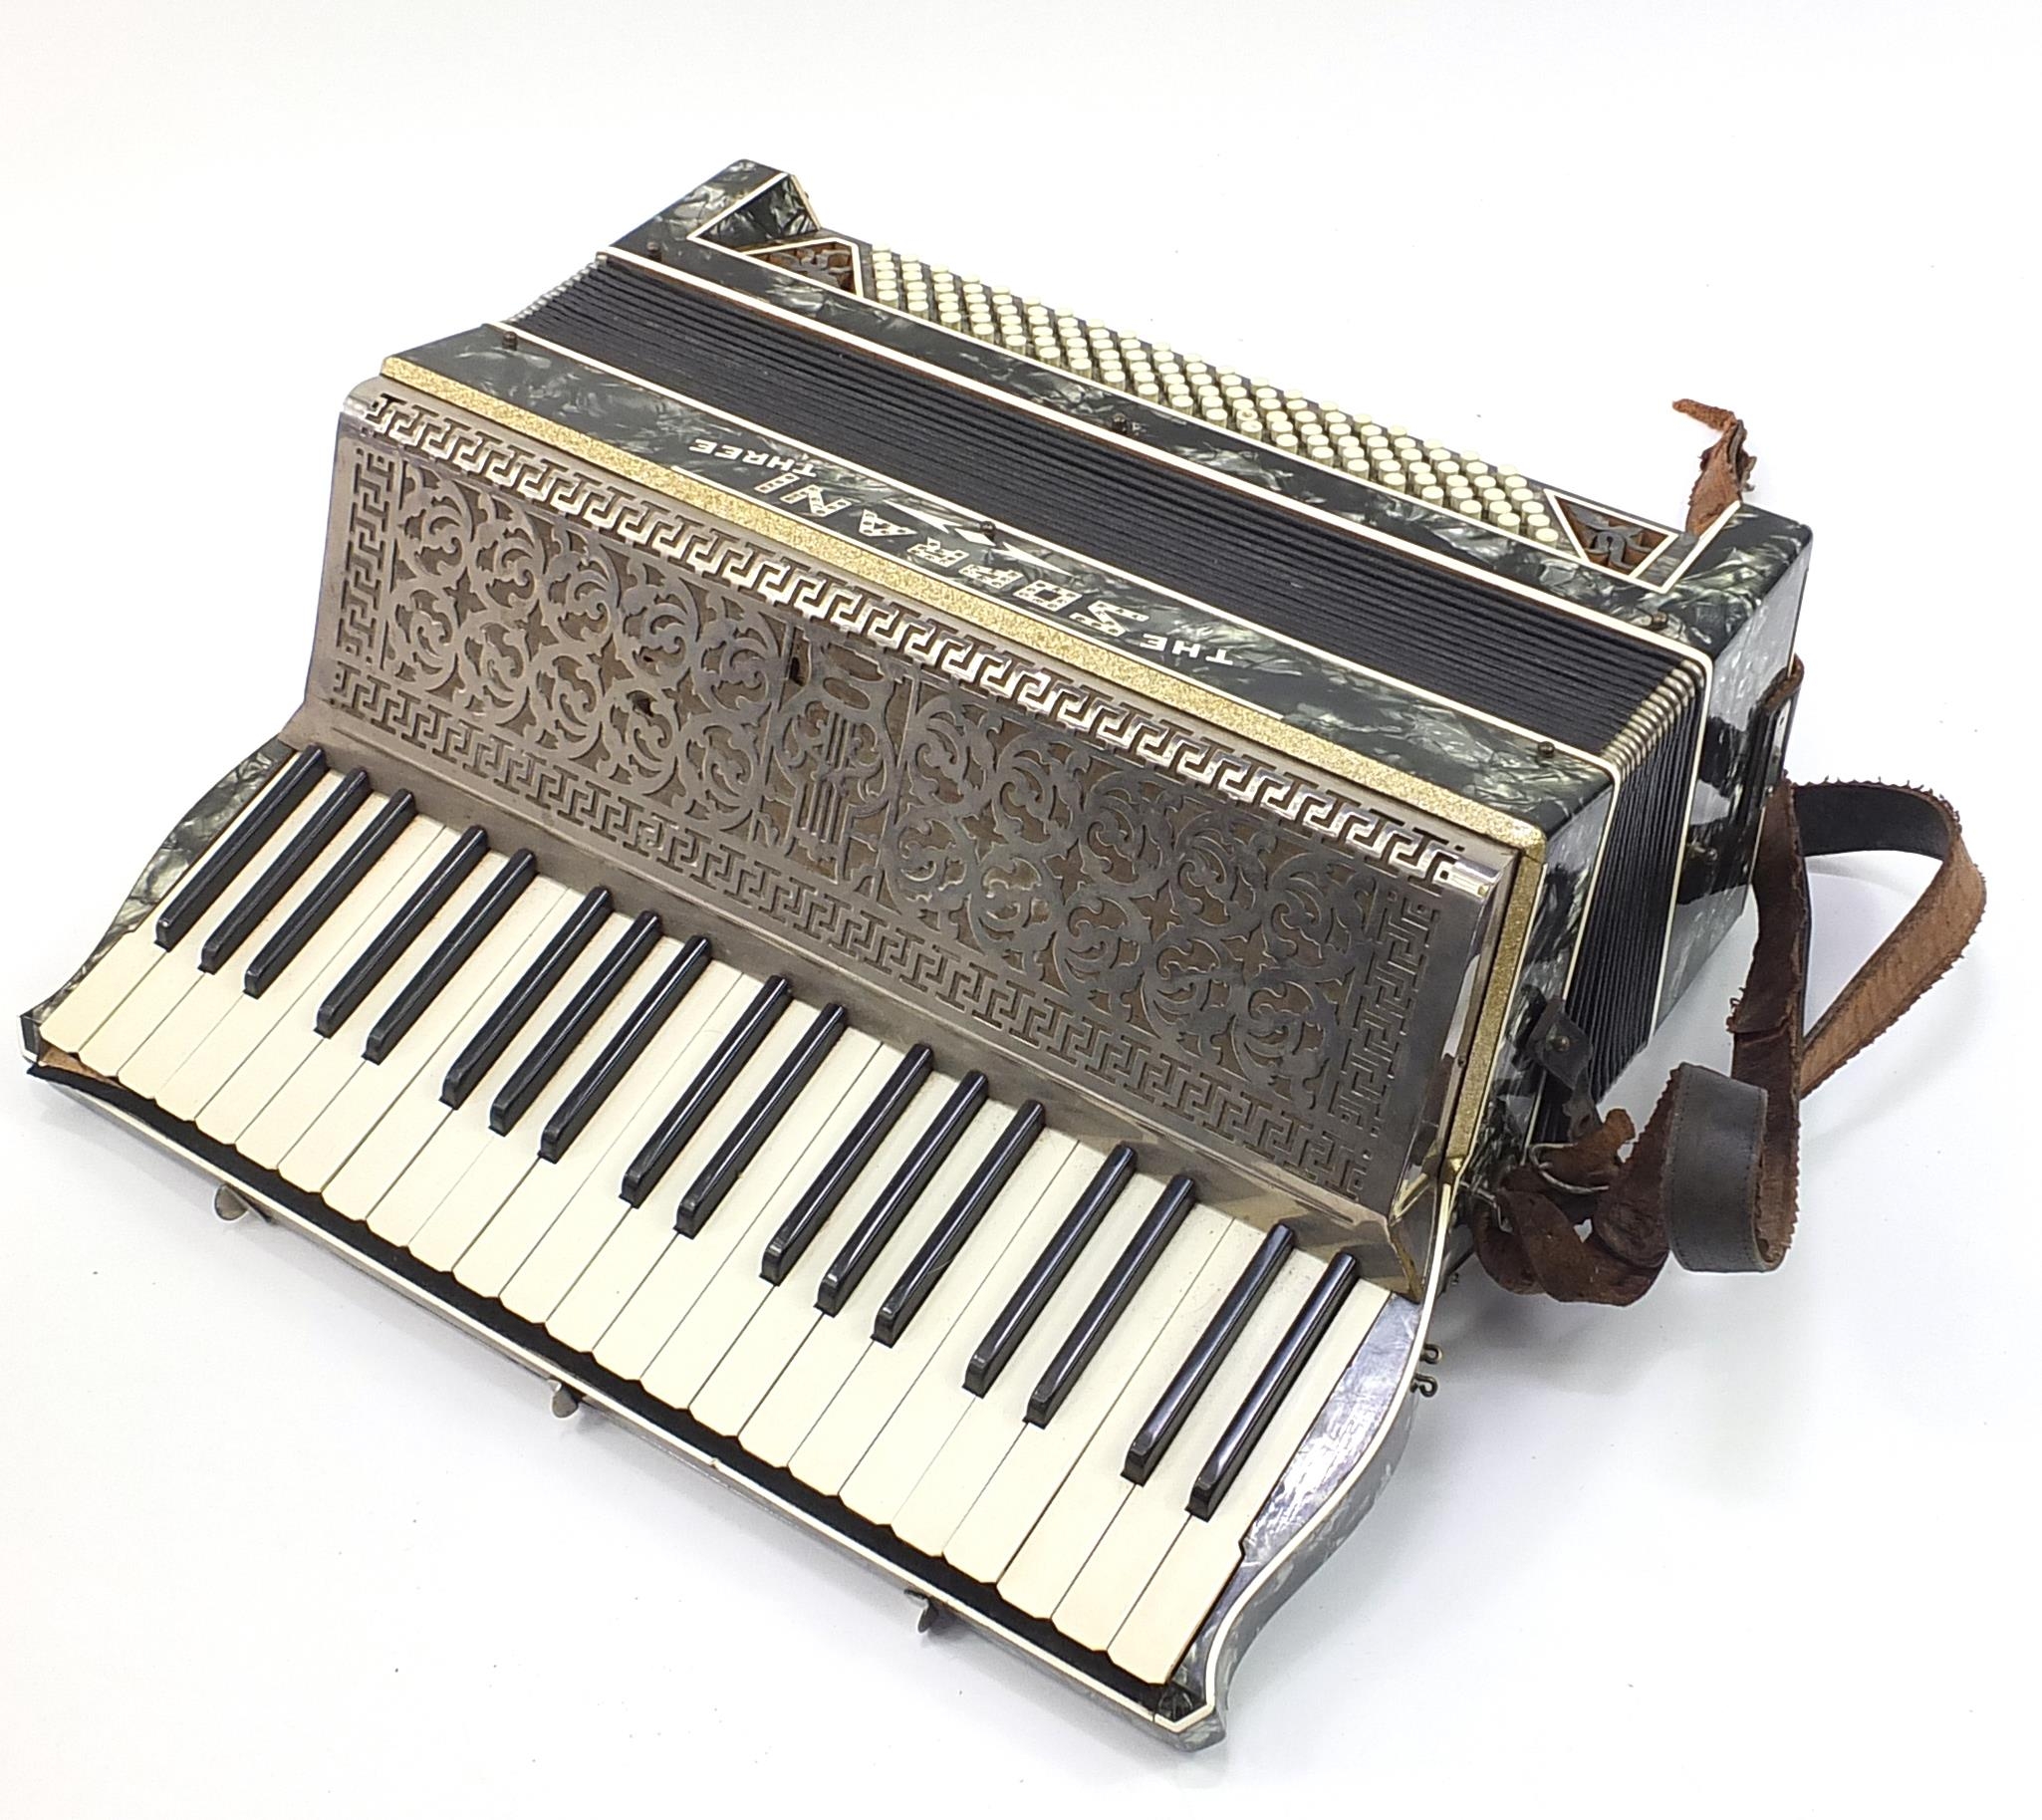 The Soprani Three Italian mother of pearl design accordion housed in protective case, 51.5cm wide